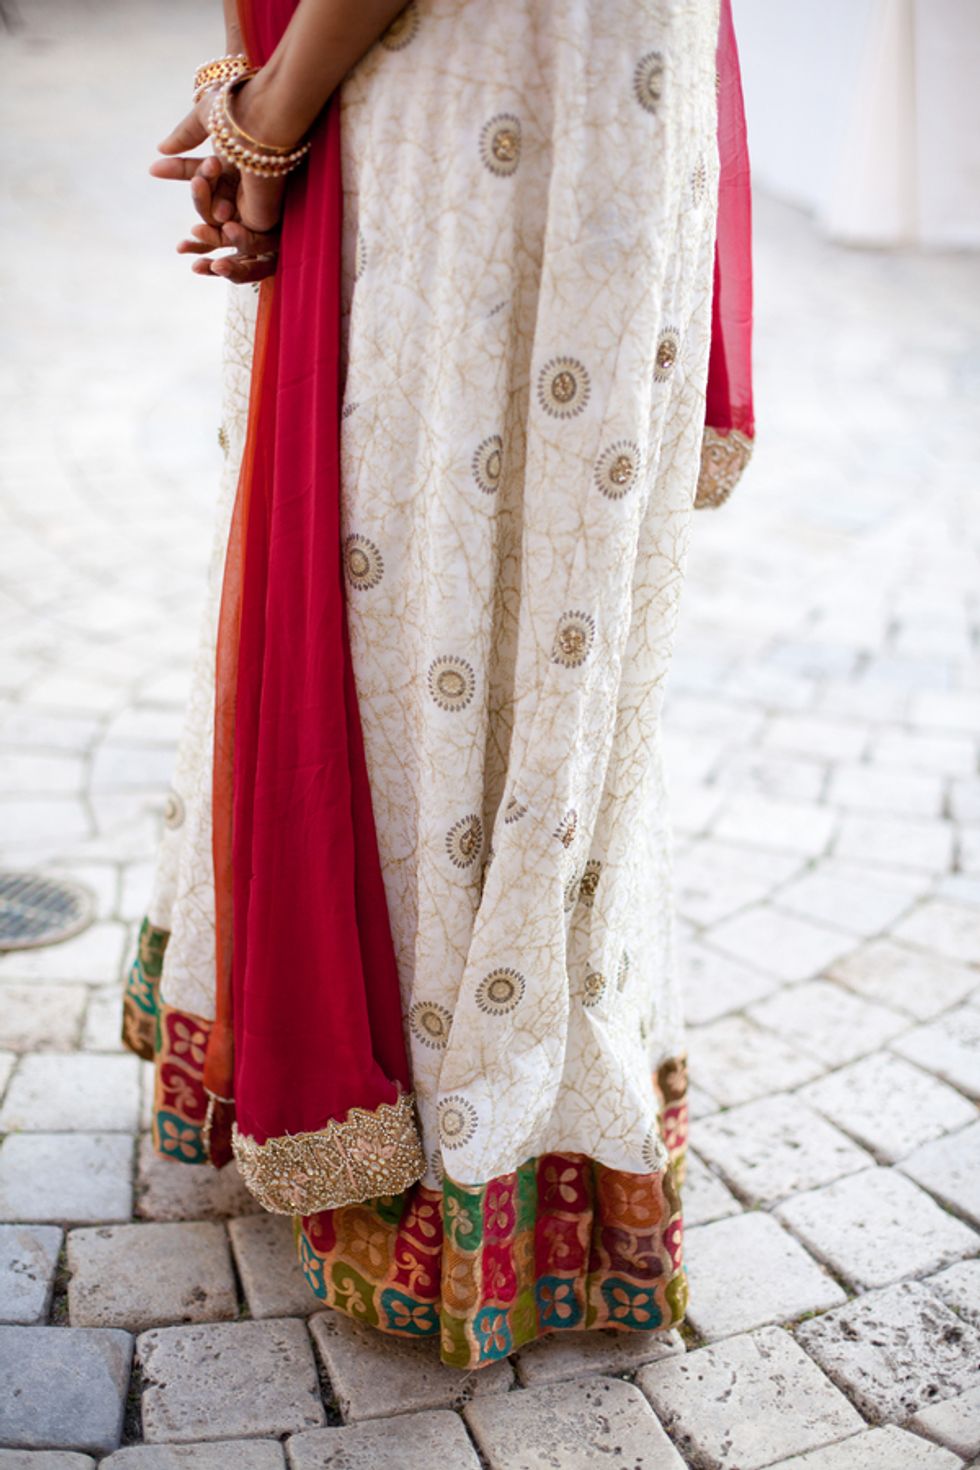 An Indian Wedding Celebration in Wine Country